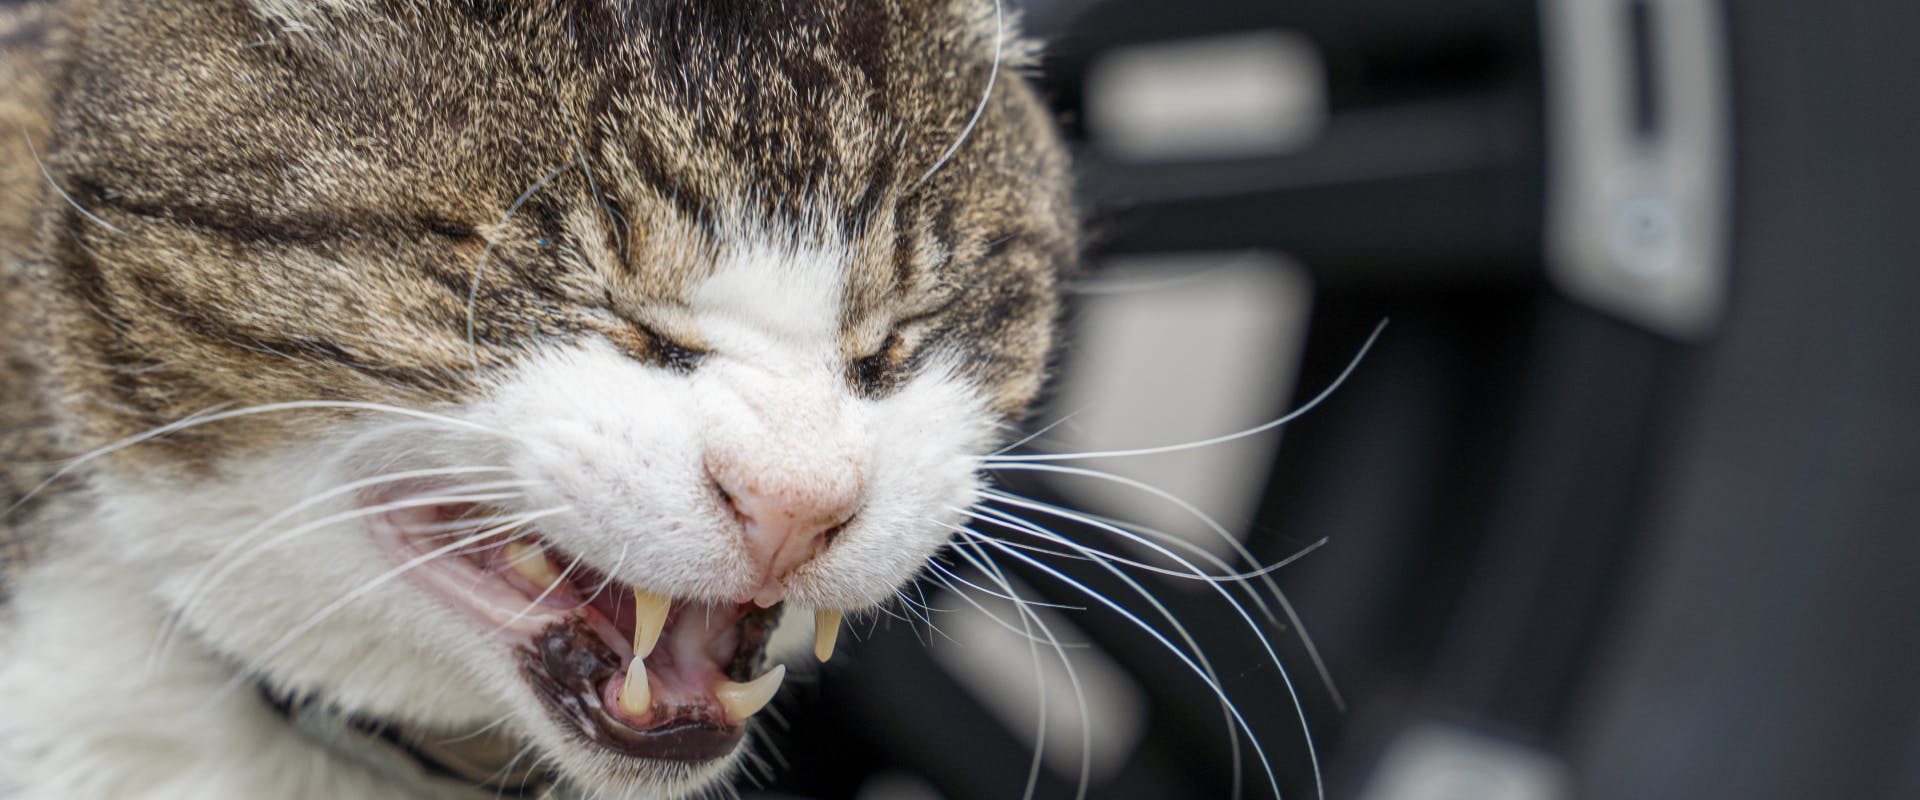 a white and tabby cat sneezing in a car